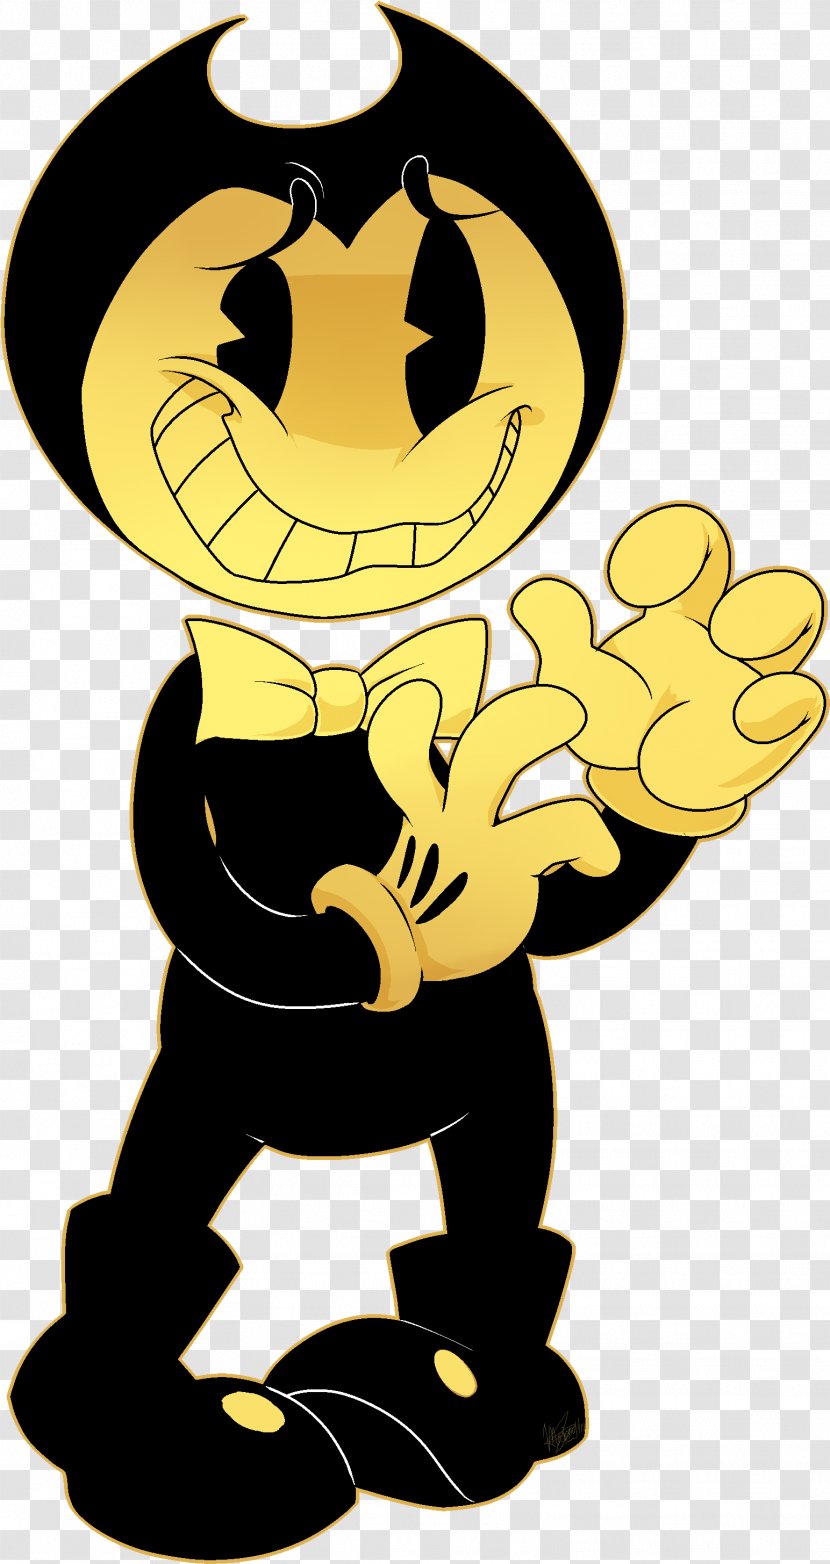 Bendy And The Ink Machine - Cartoon - Gesture Transparent PNG